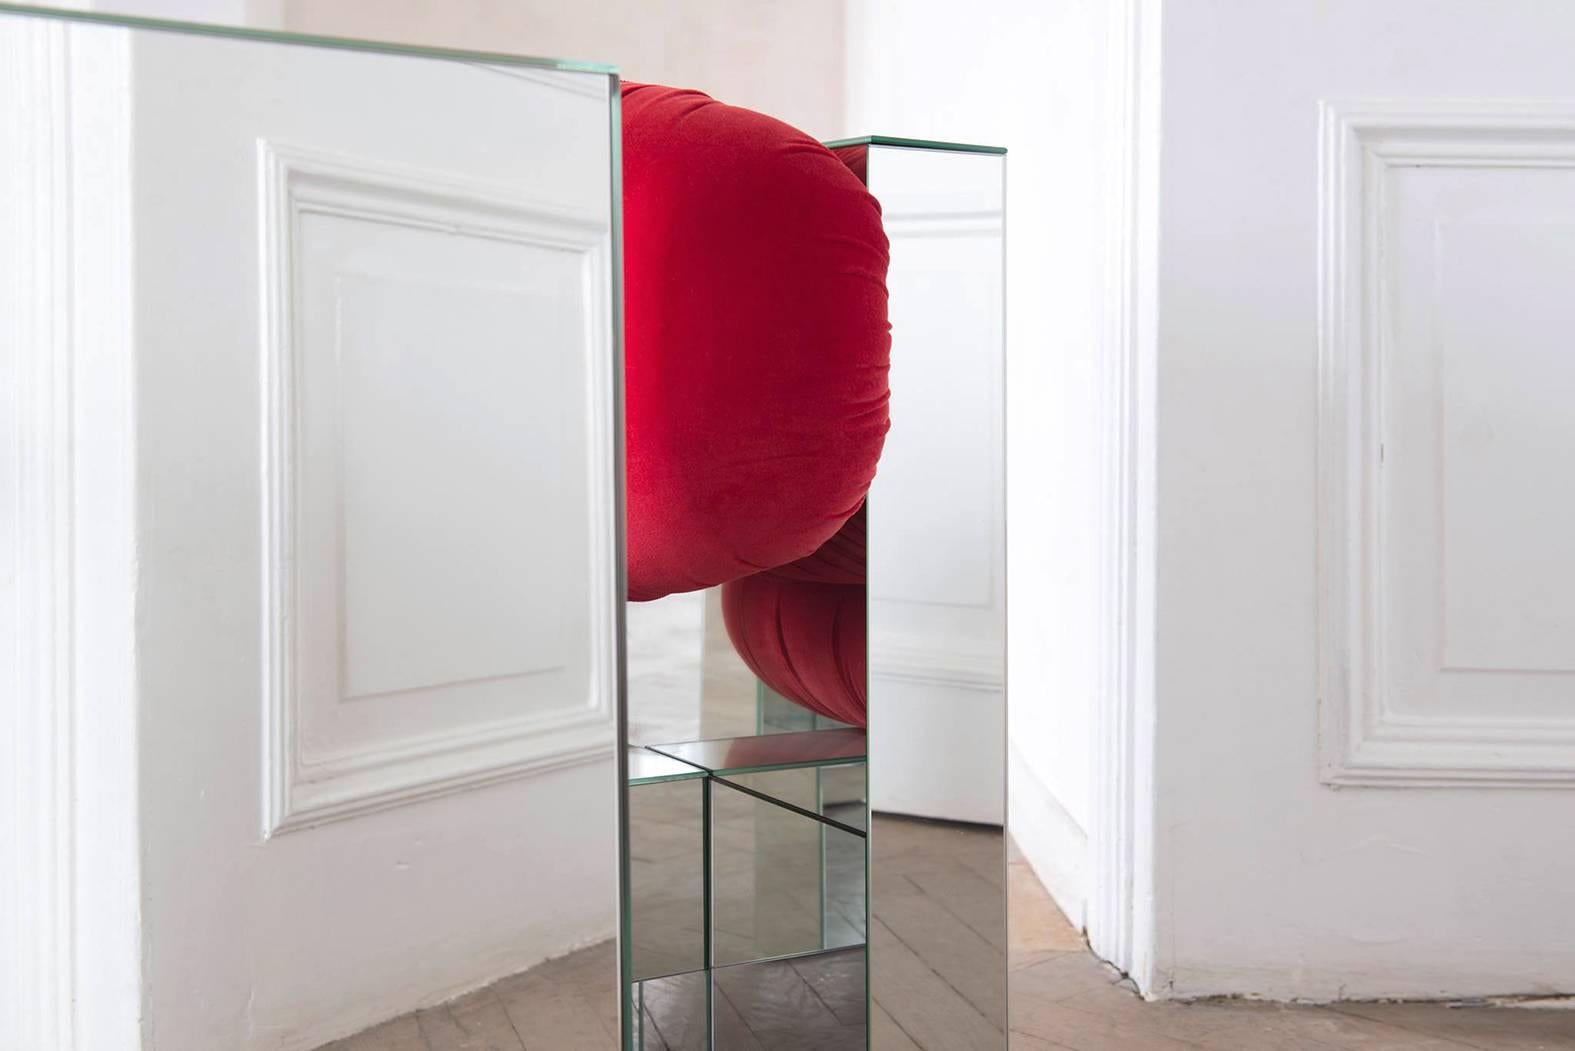 Materials: Mirror velvet
Dimensions: L 80, W 87cm, H 65cm

Invisible armchair
Invisible armchair is a mirrored piece that look constant and strong like a sculpture while it carries lightness, mystical and unpredictable appearance; it behaves